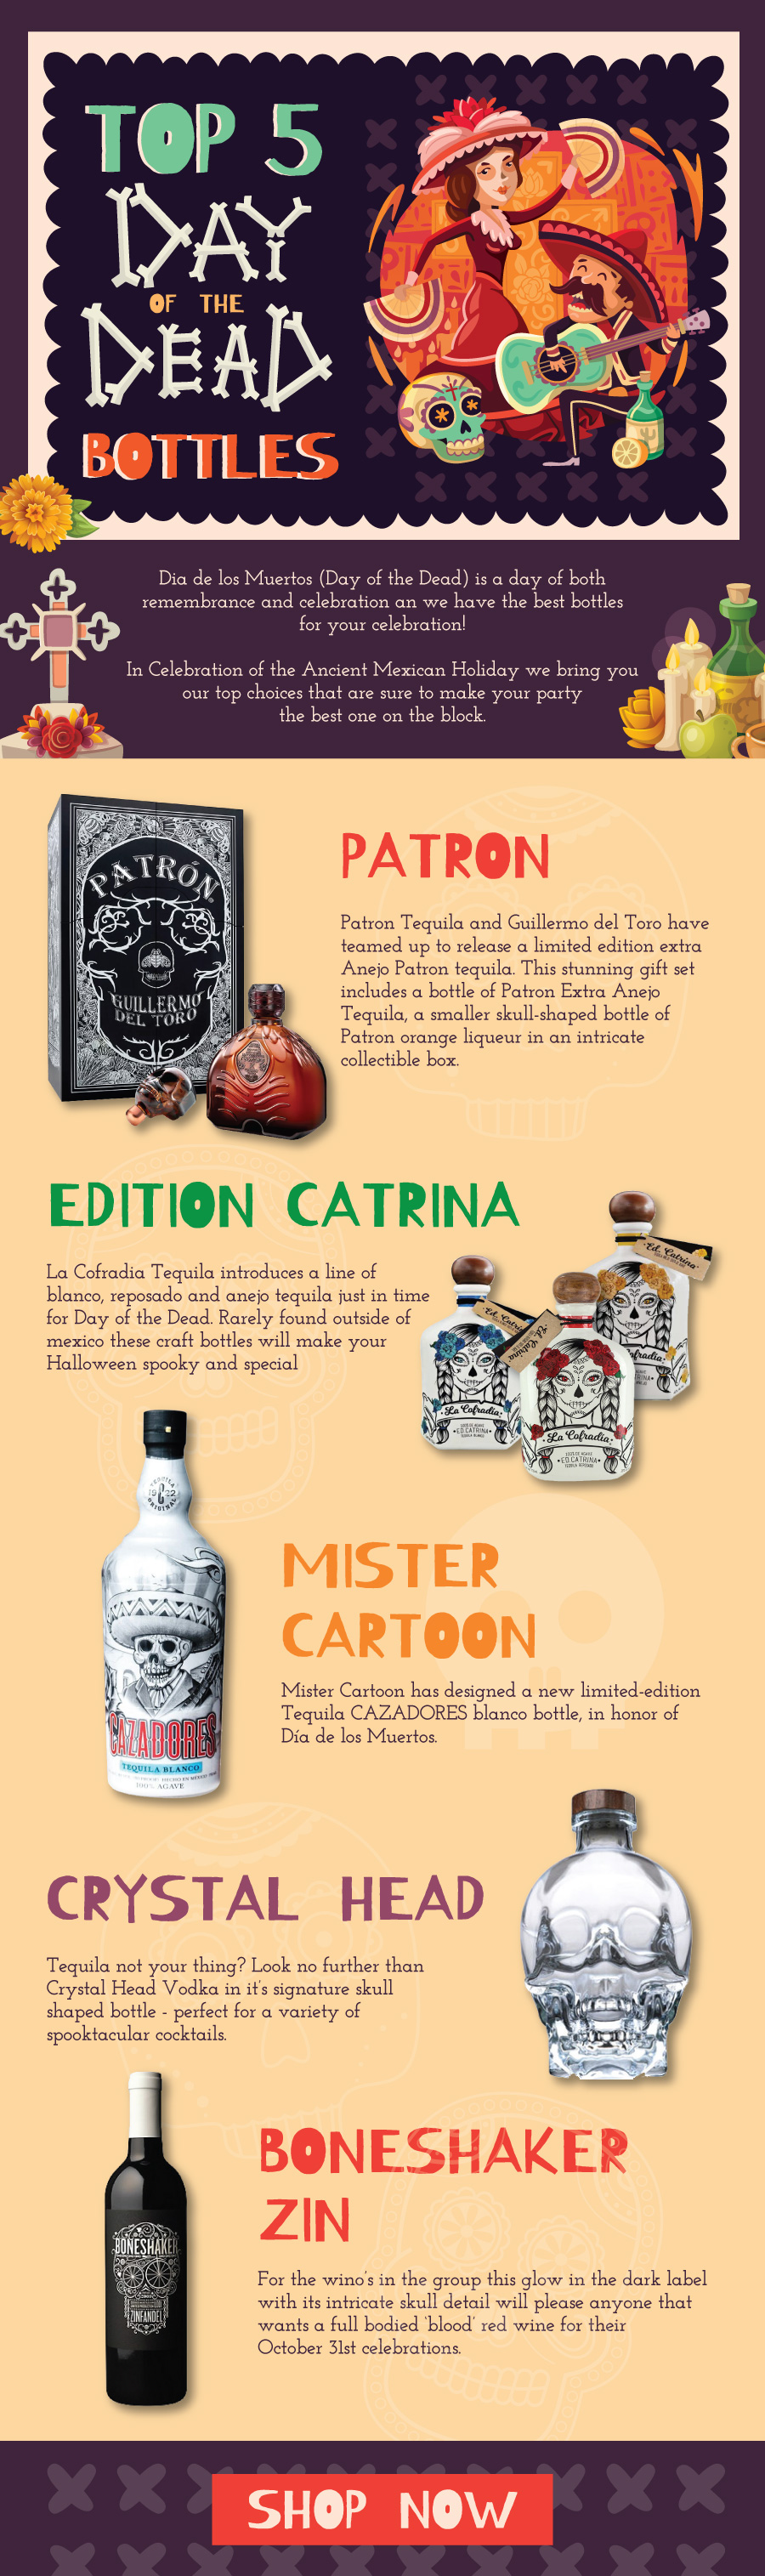 Top 5 Bottles for Day of the Dead